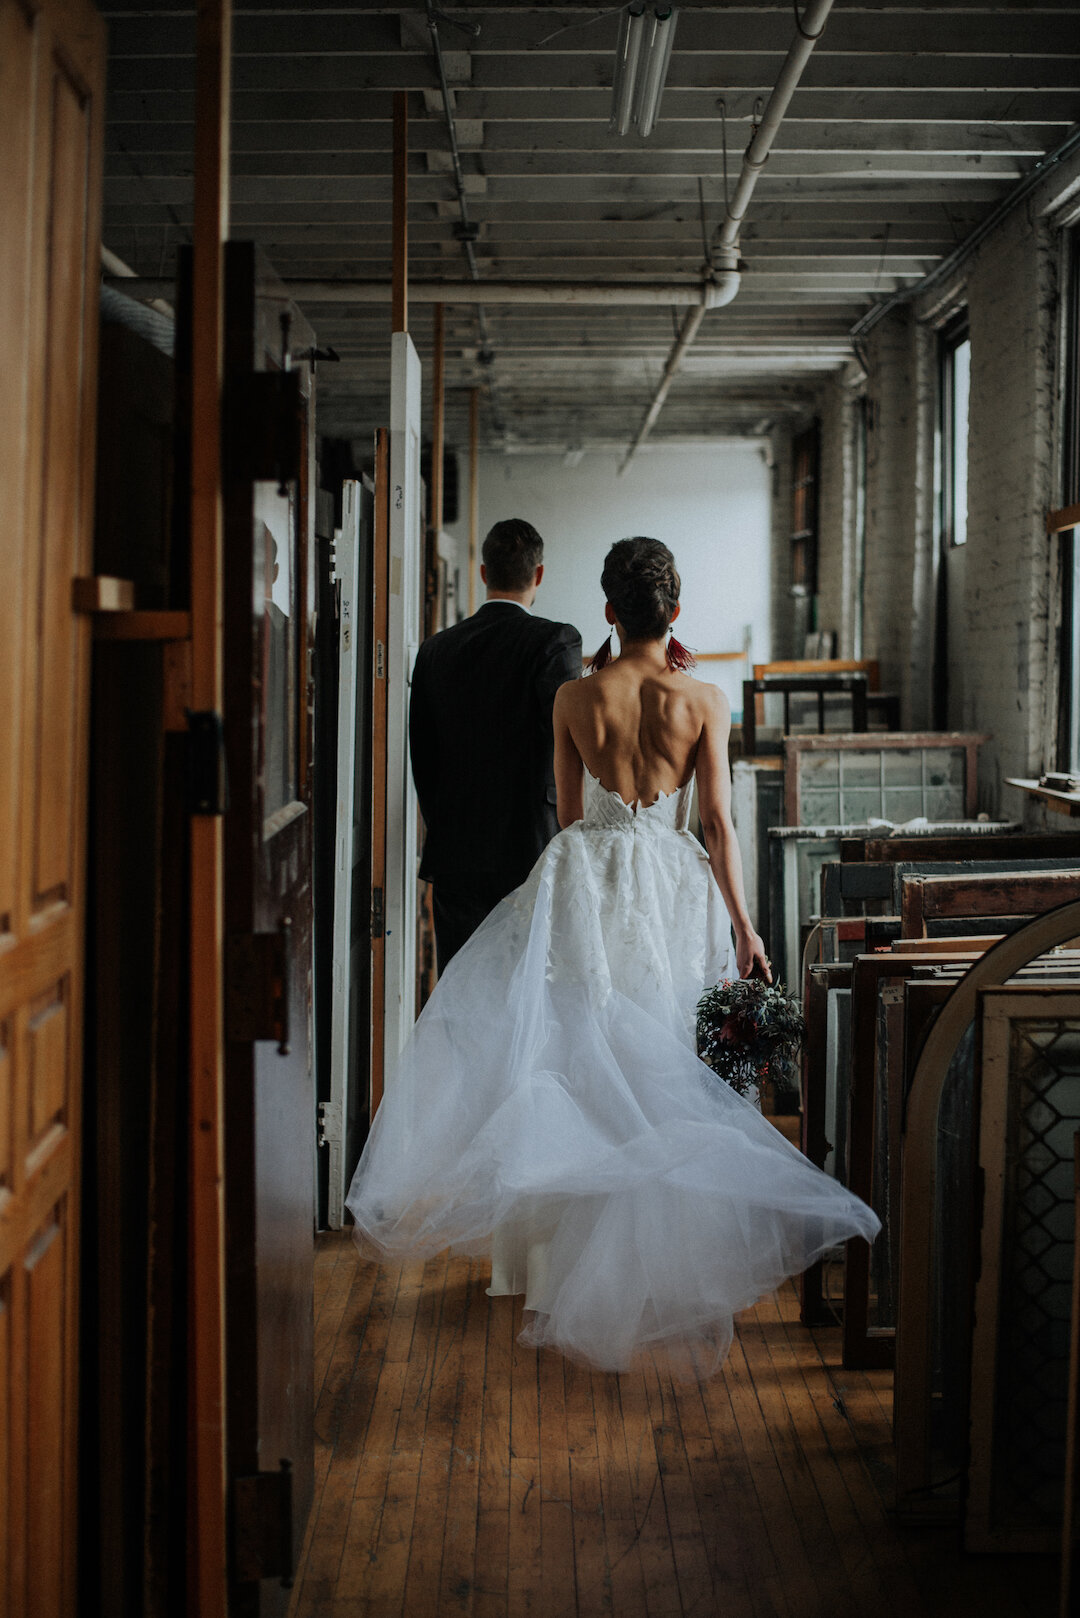 Gothic Romance in Three Story Vintage Warehouse captured by Allie Appeal and styled by Ariana Anderson featured on CHI thee WED. See more moody wedding ideas at CHItheeWED.com!